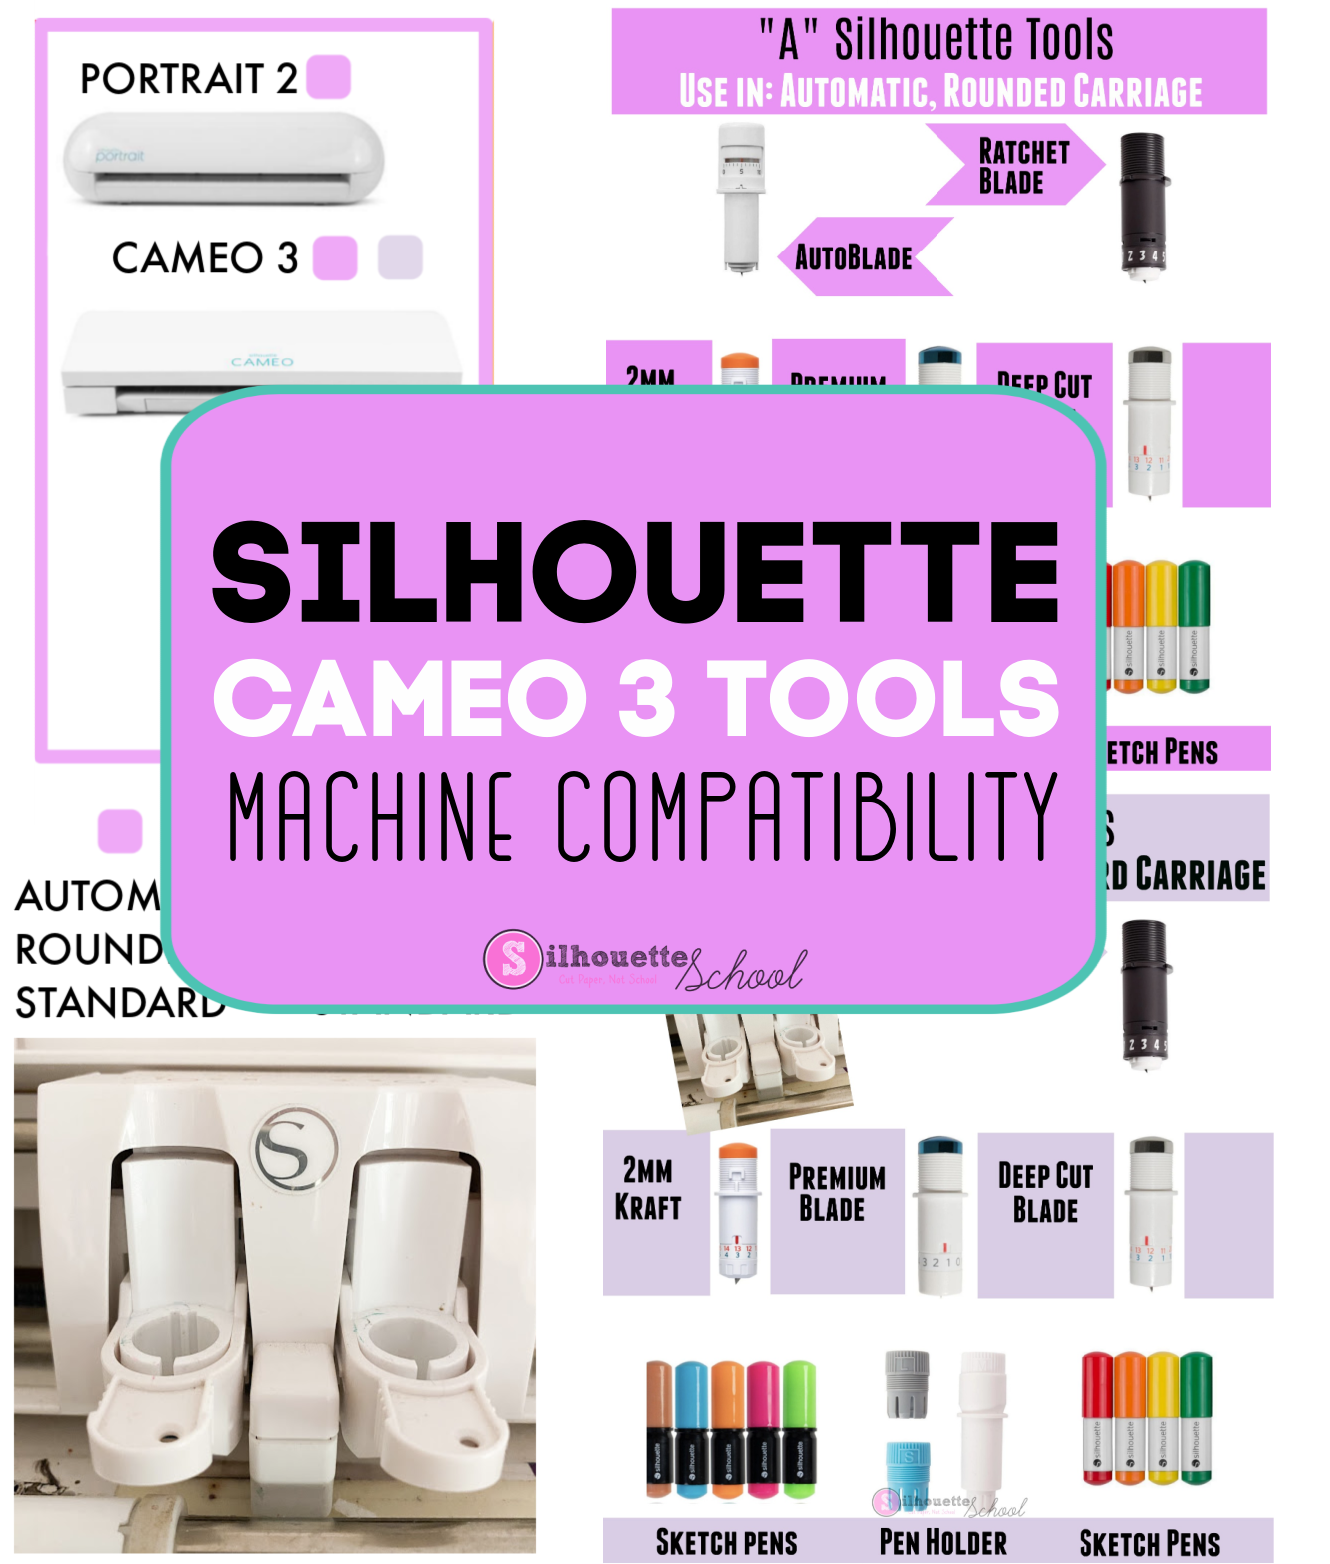 Sheet Guide Compatible with Silhouette Cameo 3 4